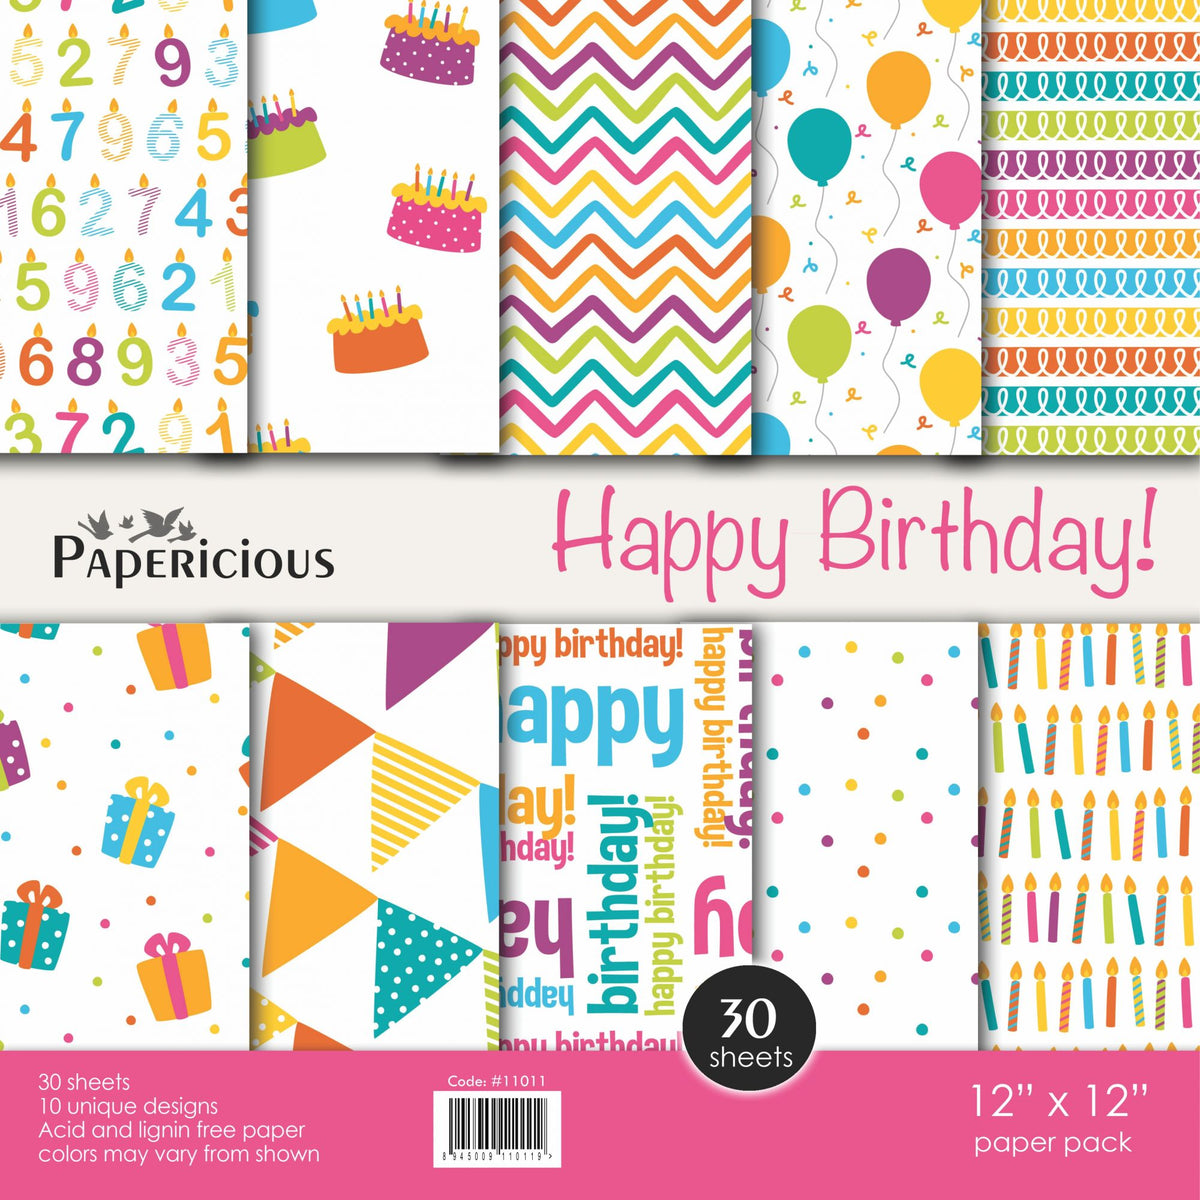 PAPERICIOUS - Happy Birthday -  Designer Pattern Printed Scrapbook Papers / 30 sheets